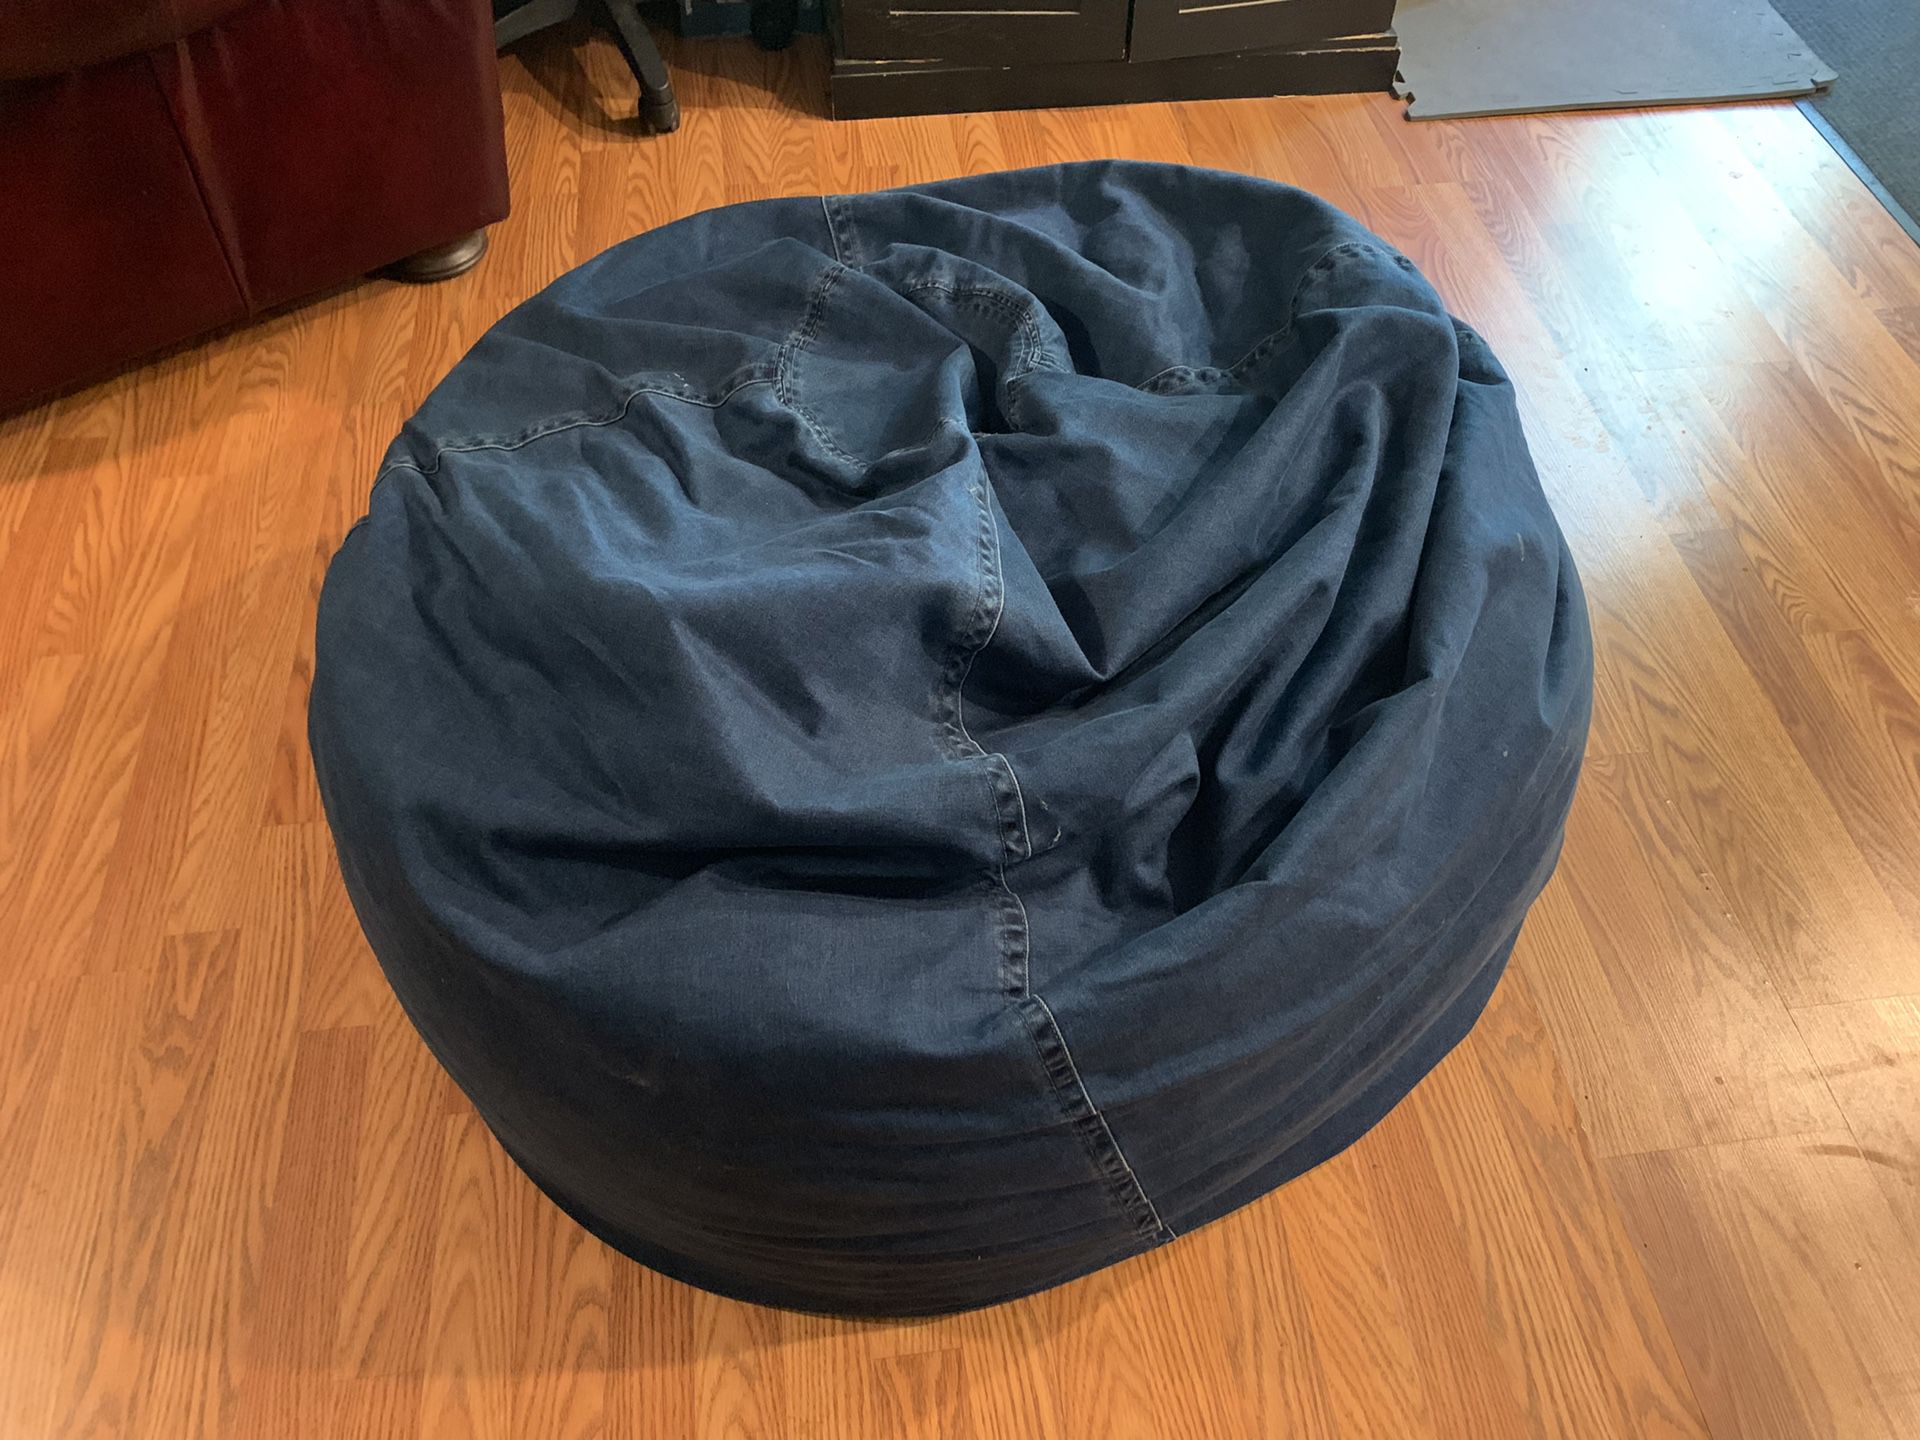 2 large oversized bean bags in great condition